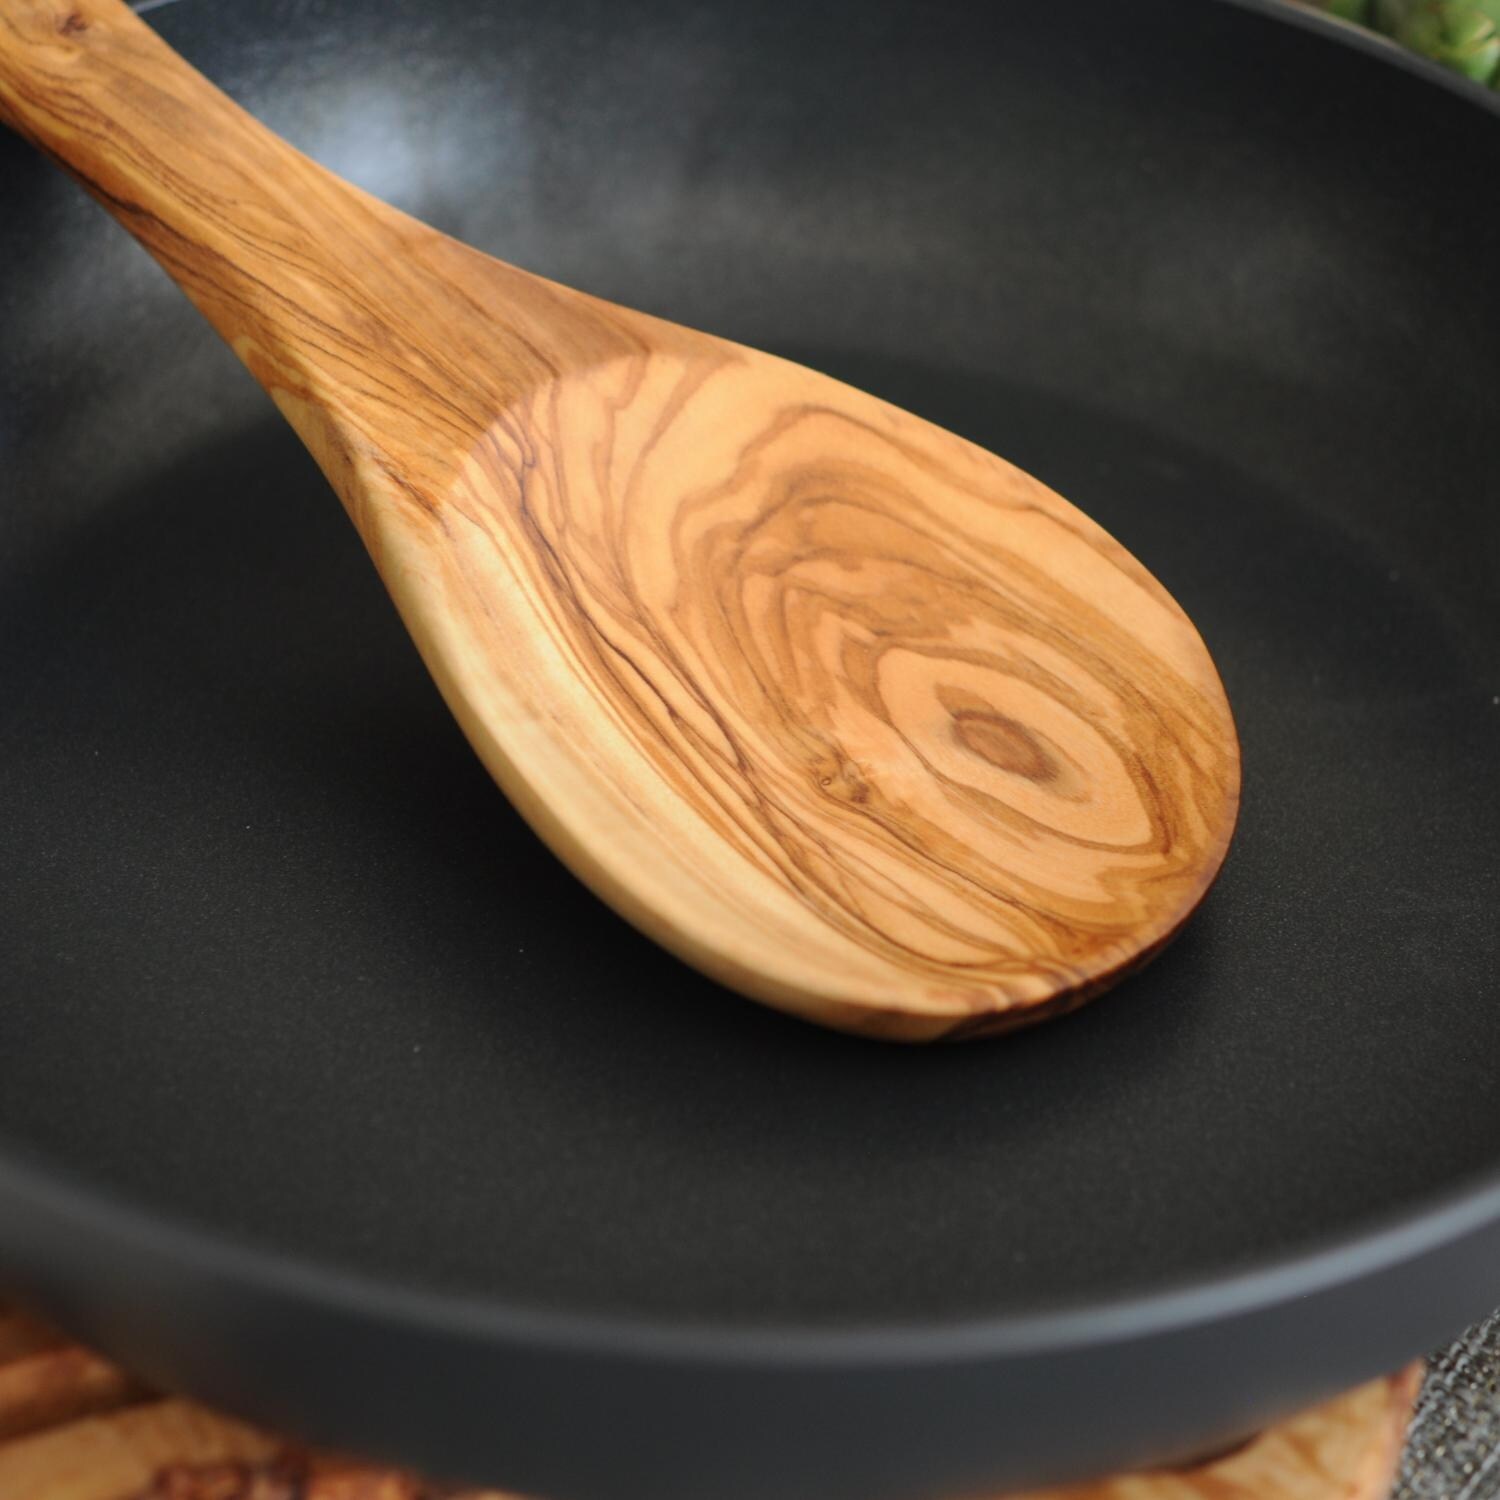 https://ak1.ostkcdn.com/images/products/is/images/direct/6e3df5fbf611e68c13a06db52977d9ae50ea9cc2/Olive-Wood-Large-Mouth-Serving-Cooking-Spoon.jpg